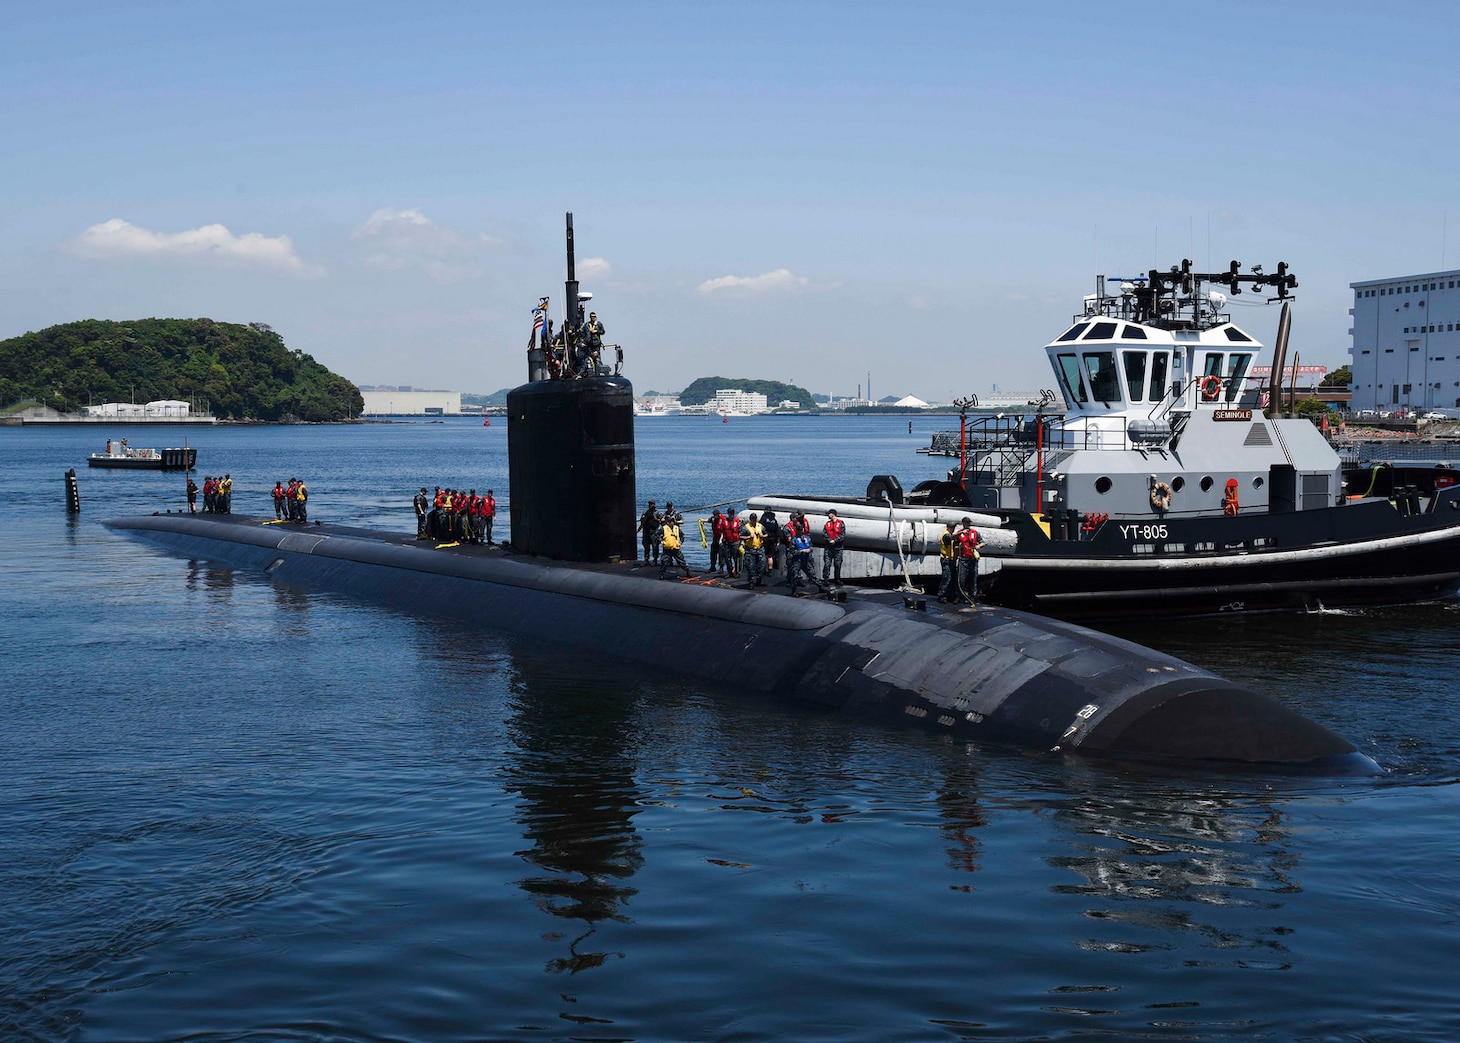 The Los Angeles-class attack submarine USS Santa Fe (SSN 763) prepares to moor at Fleet Activities Yokosuka, May 11, 2017. The port visit strengthens the already positive alliance between the U.S. and Japan through the crews’ interaction with the Japan Maritime Self-Defense Force, and also demonstrates the U.S. Navy’s commitment to regional stability and maritime security in the U.S. 7th Fleet area of operations. 